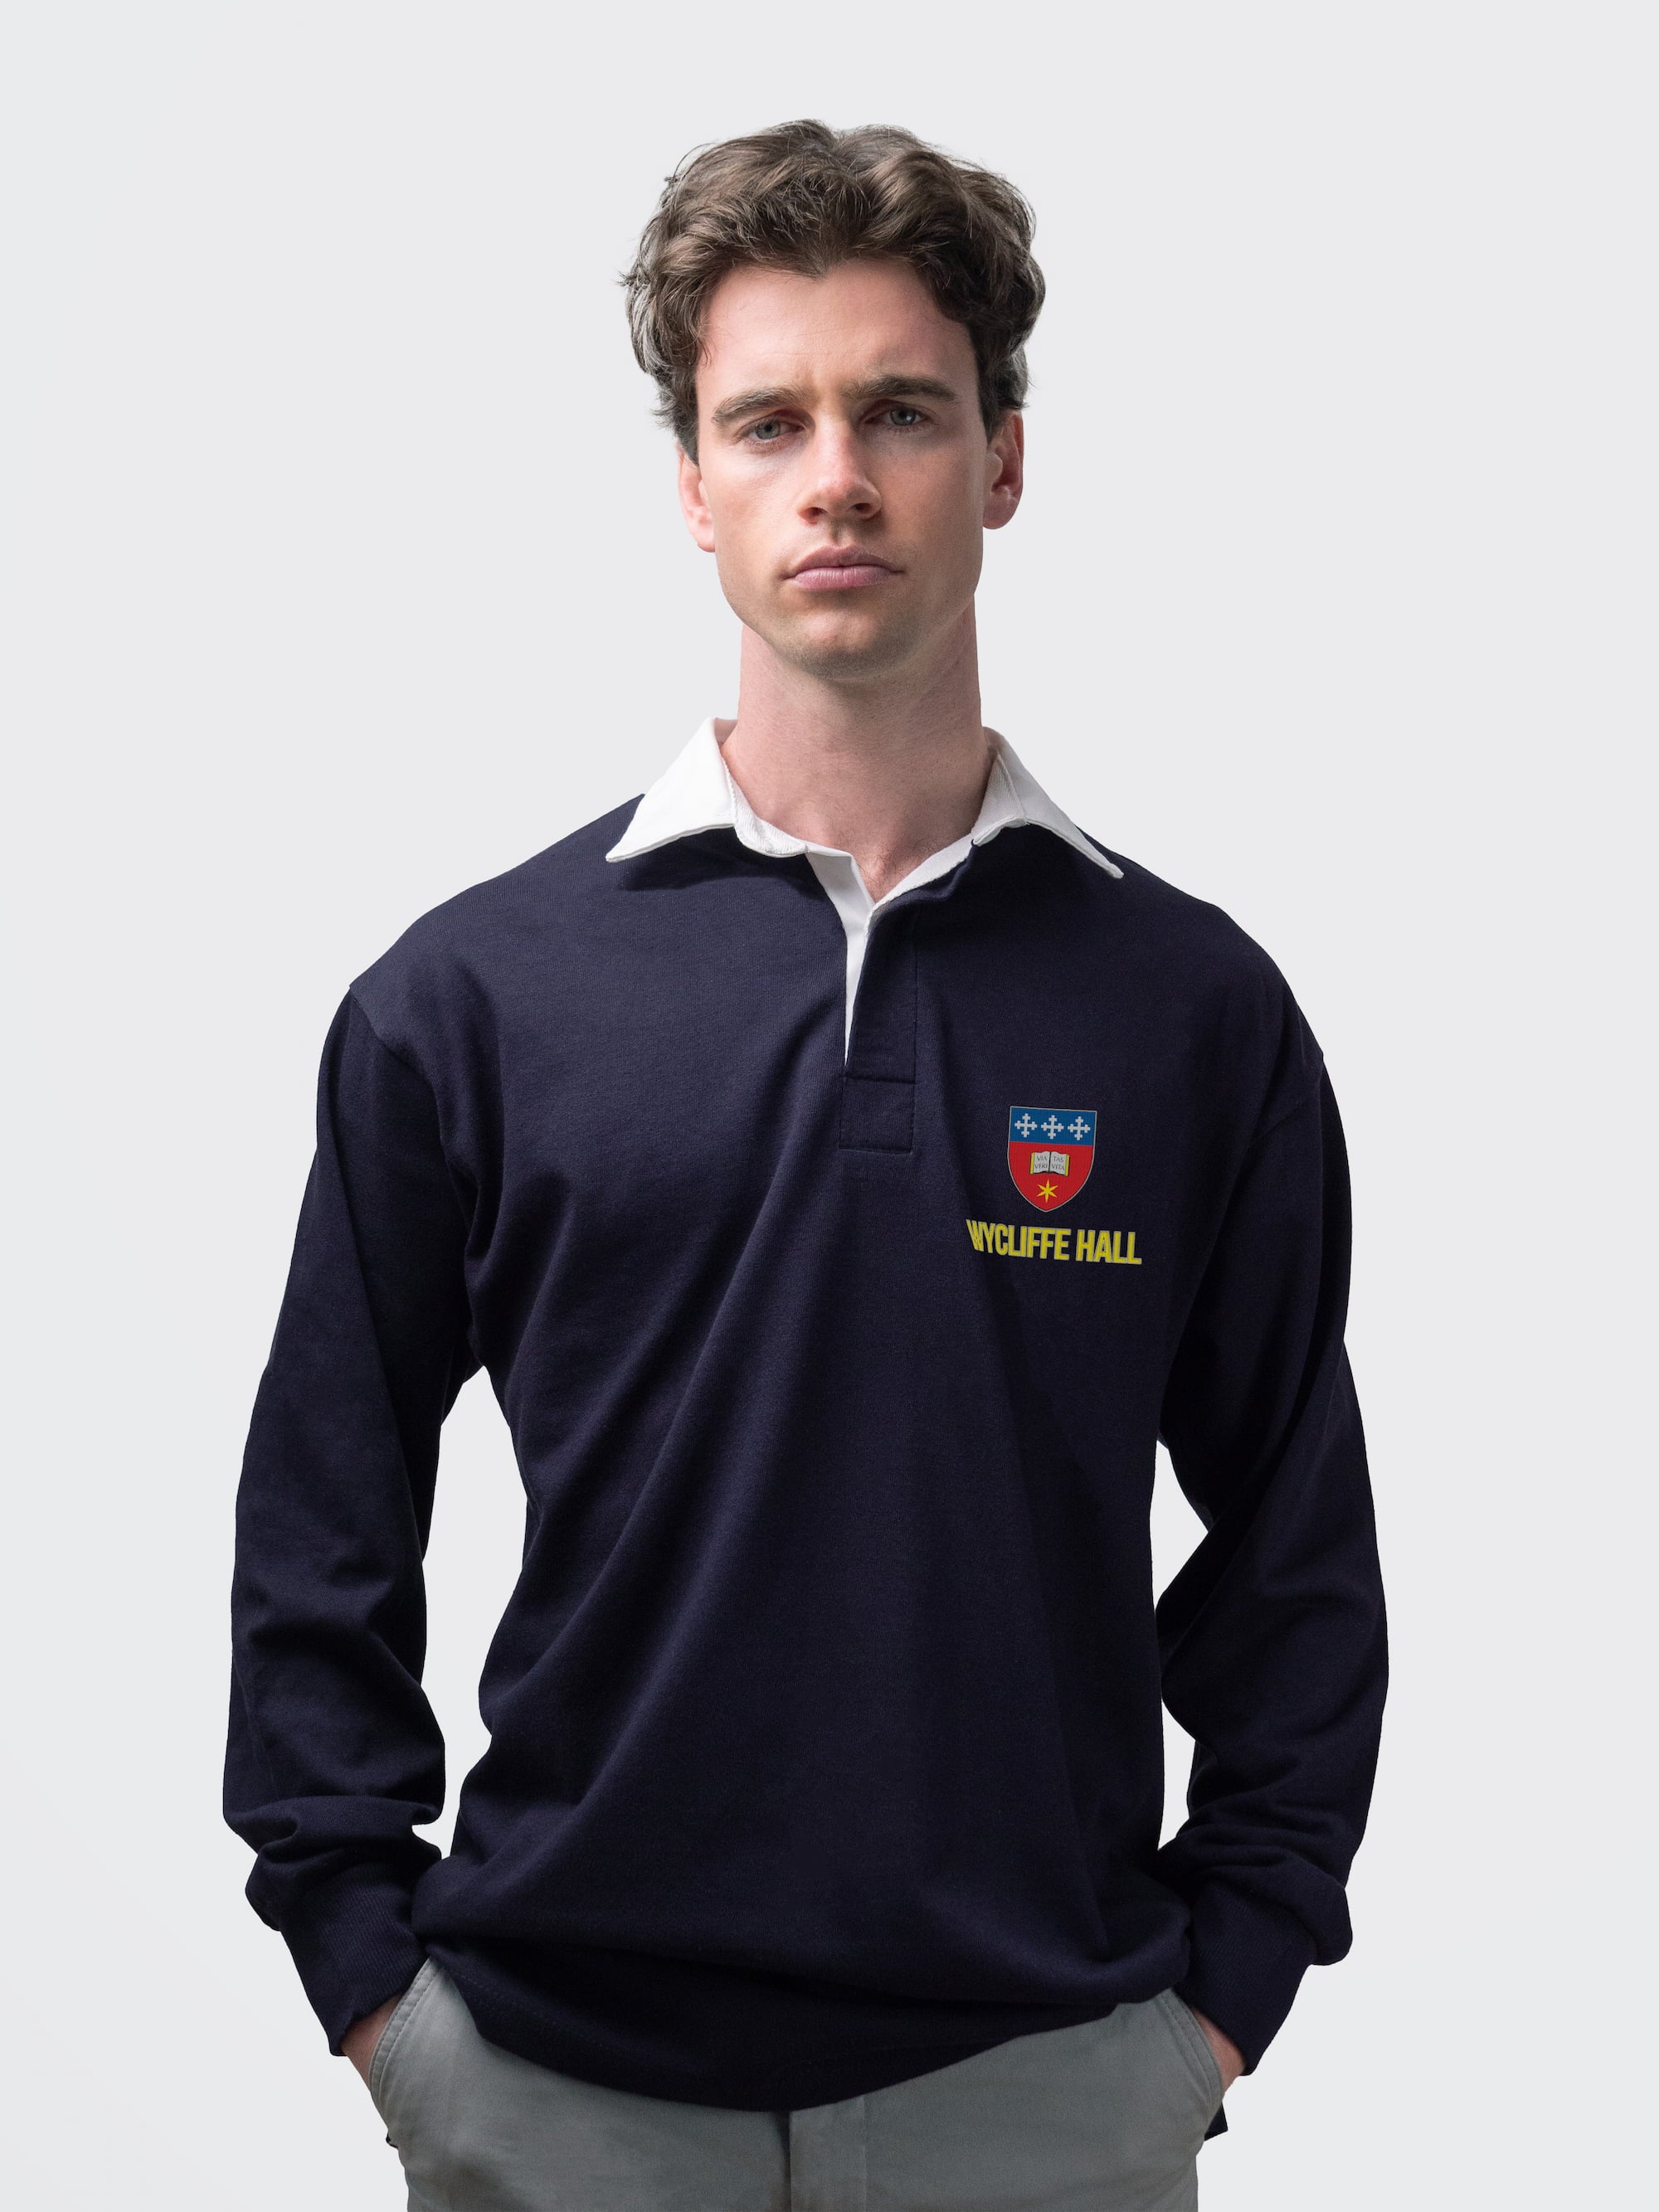 Wycliffe Hall student wearing an embroidered mens rugby shirt in navy